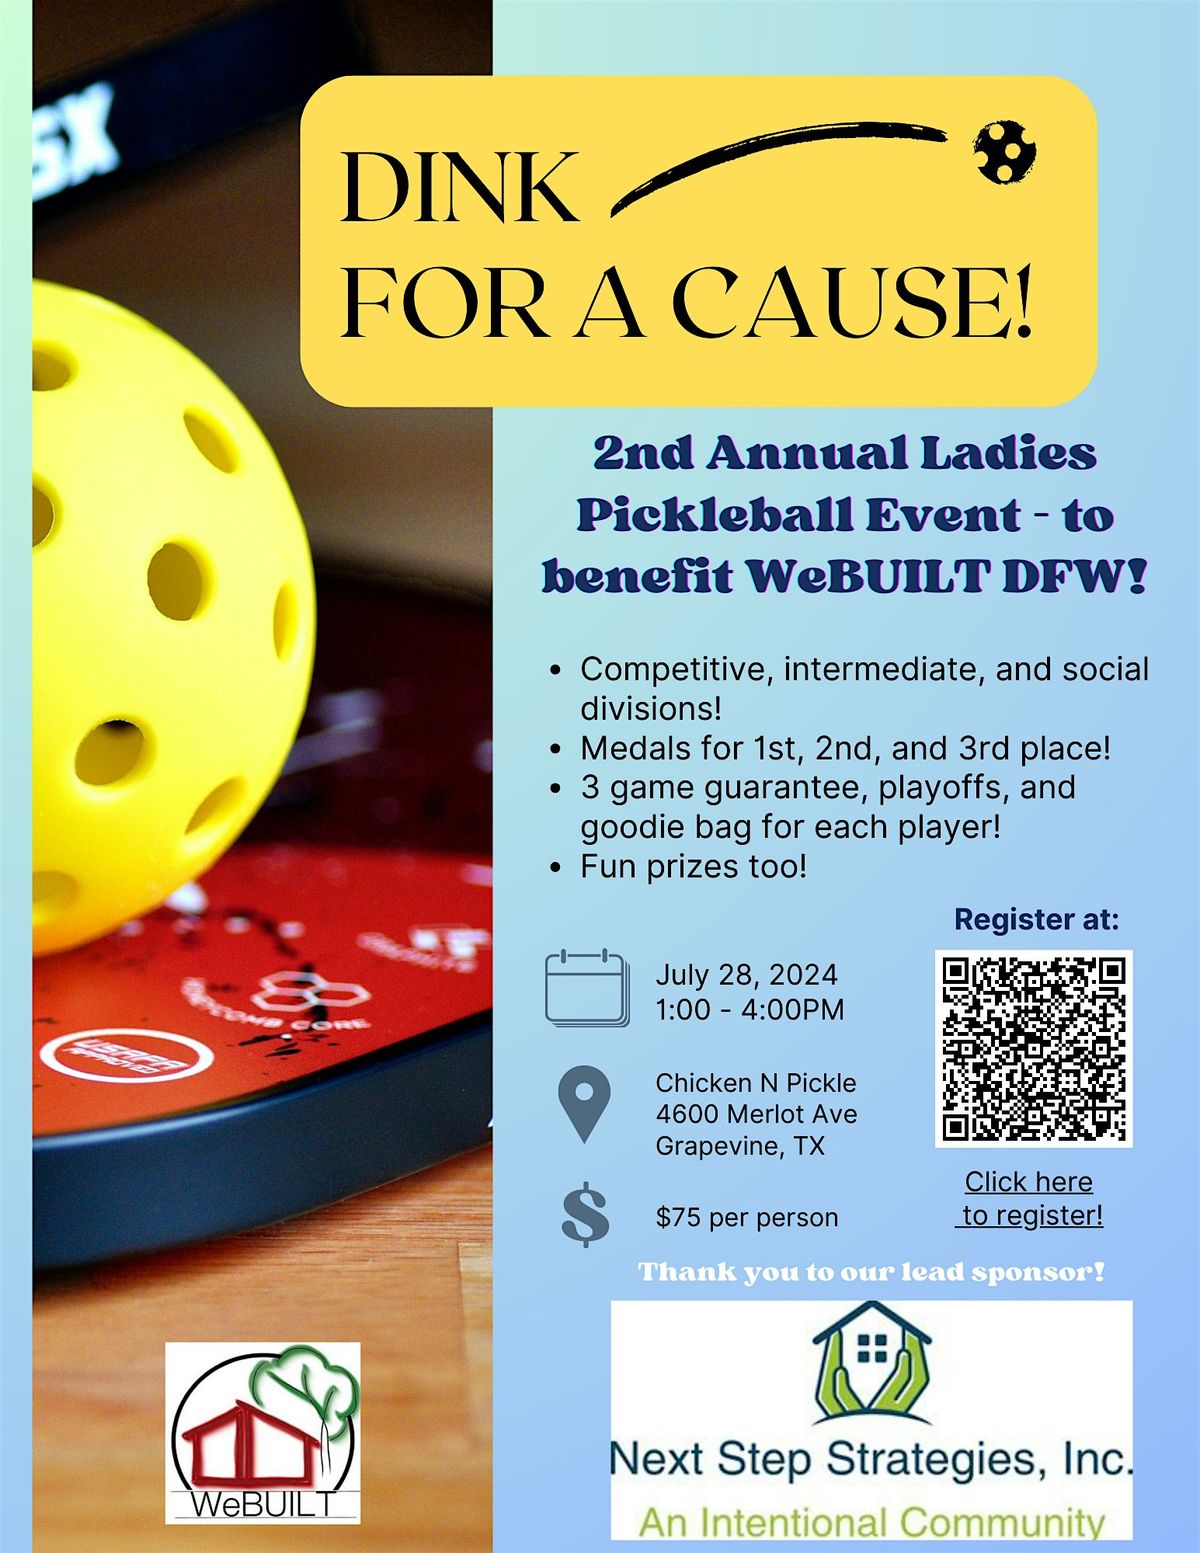 Dink for a Cause Ladies Pickleball Tournament benefiting WeBUILT DFW